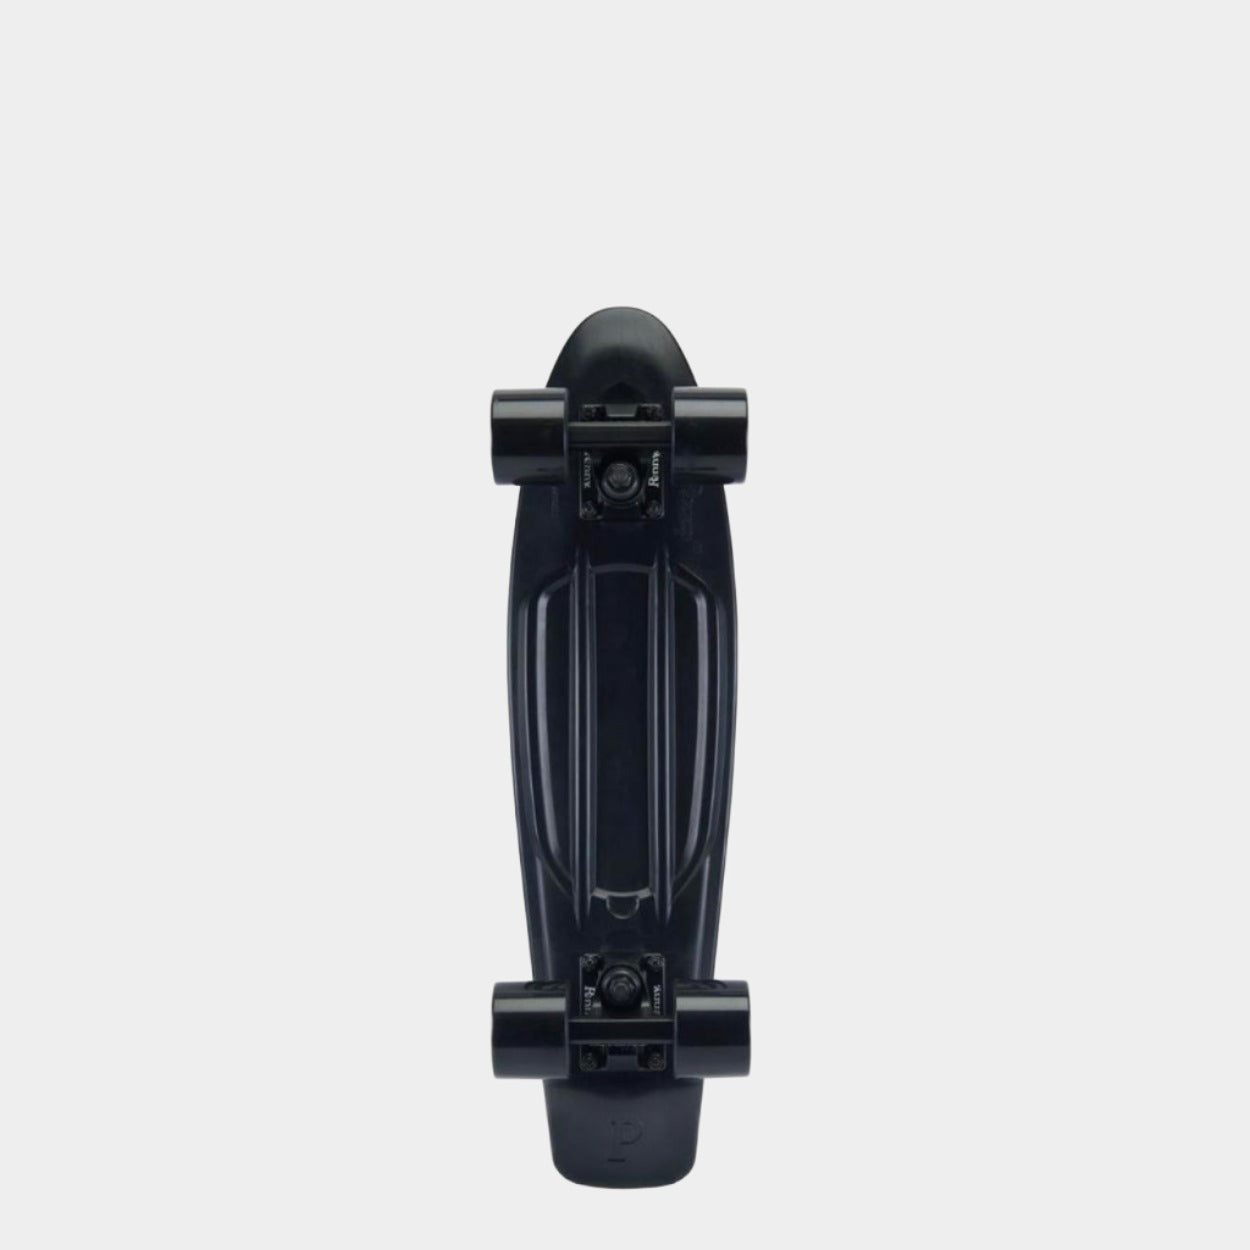 Penny Cruiser 22" - Blackout - Prime Delux Store